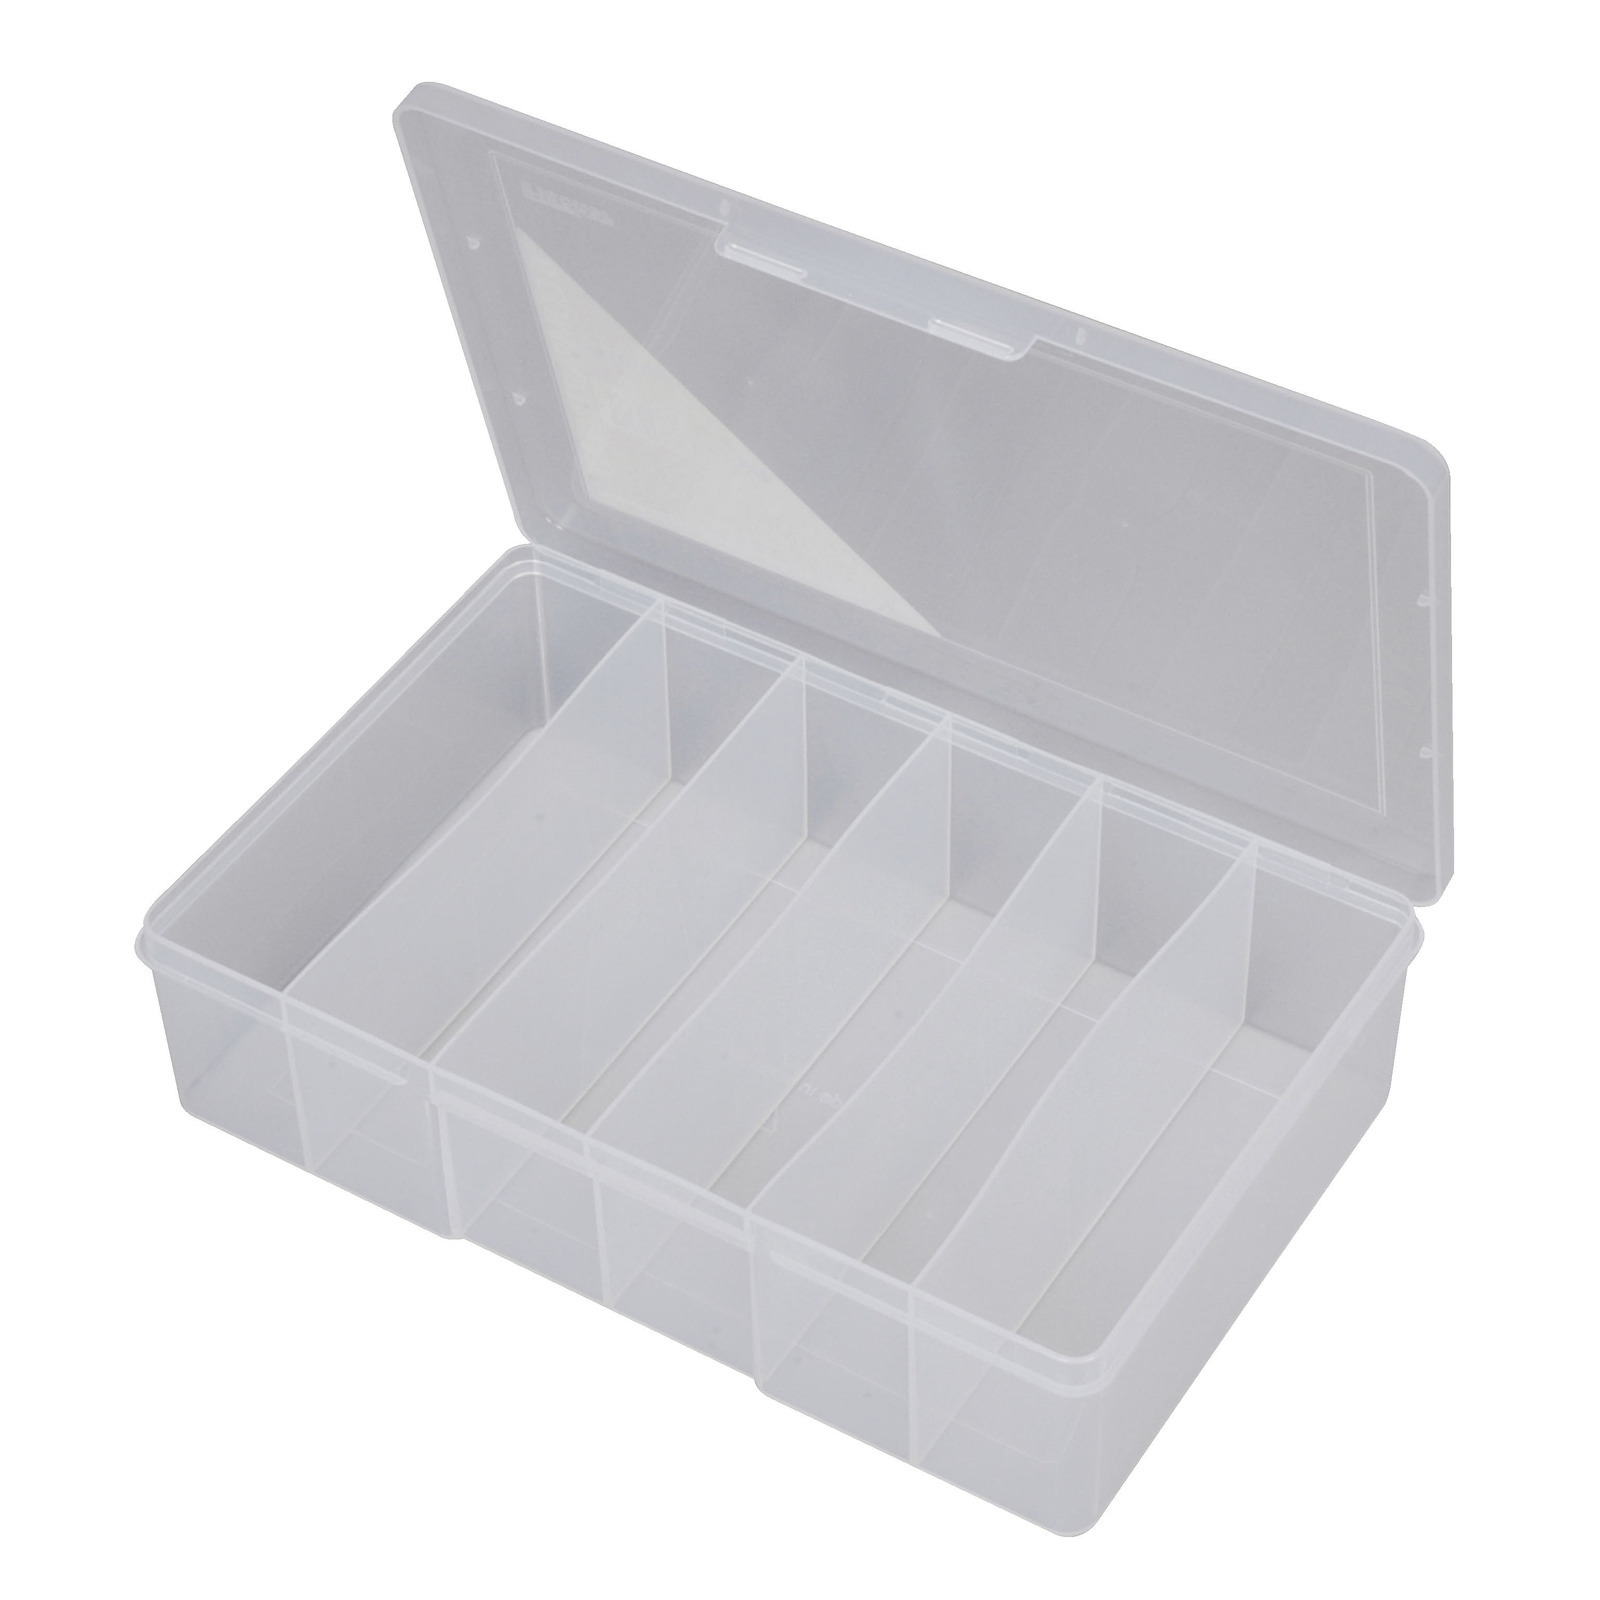 Accessory Boxes Large - Deep (6 compartment)